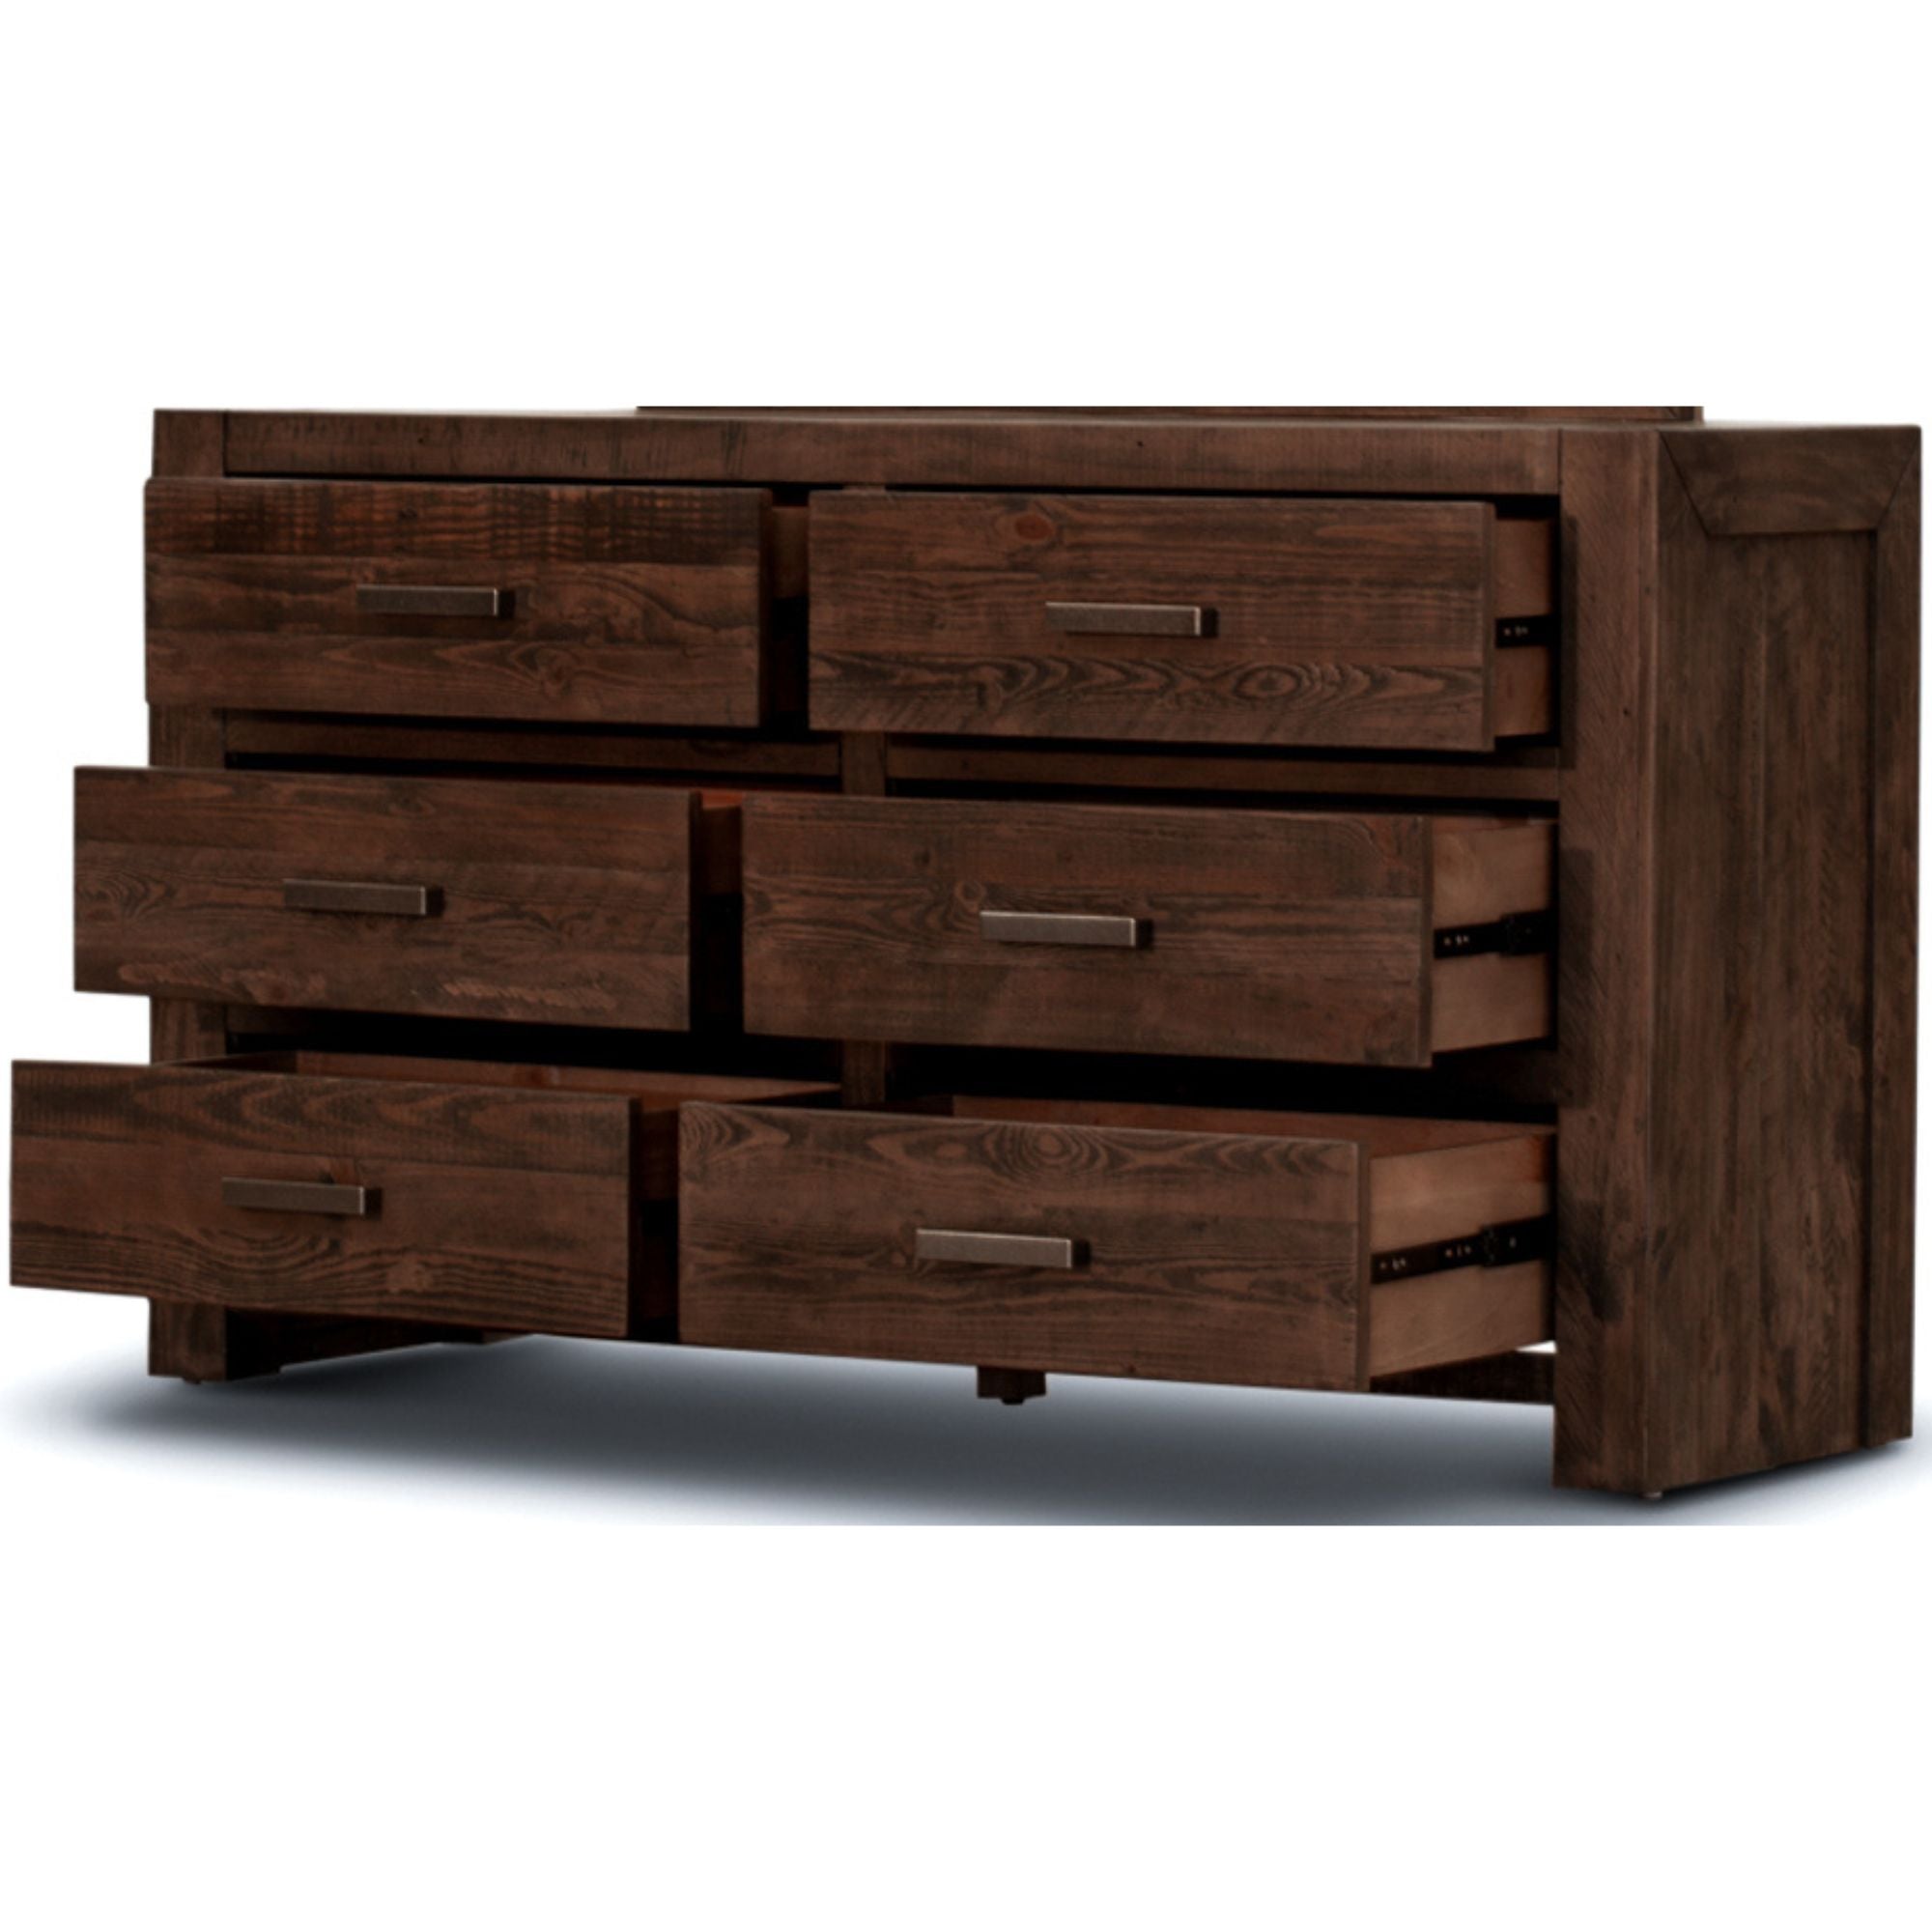 Dresser 6 Chest Of Drawers Solid Pine Wood Storage Cabinet - Grey Stone